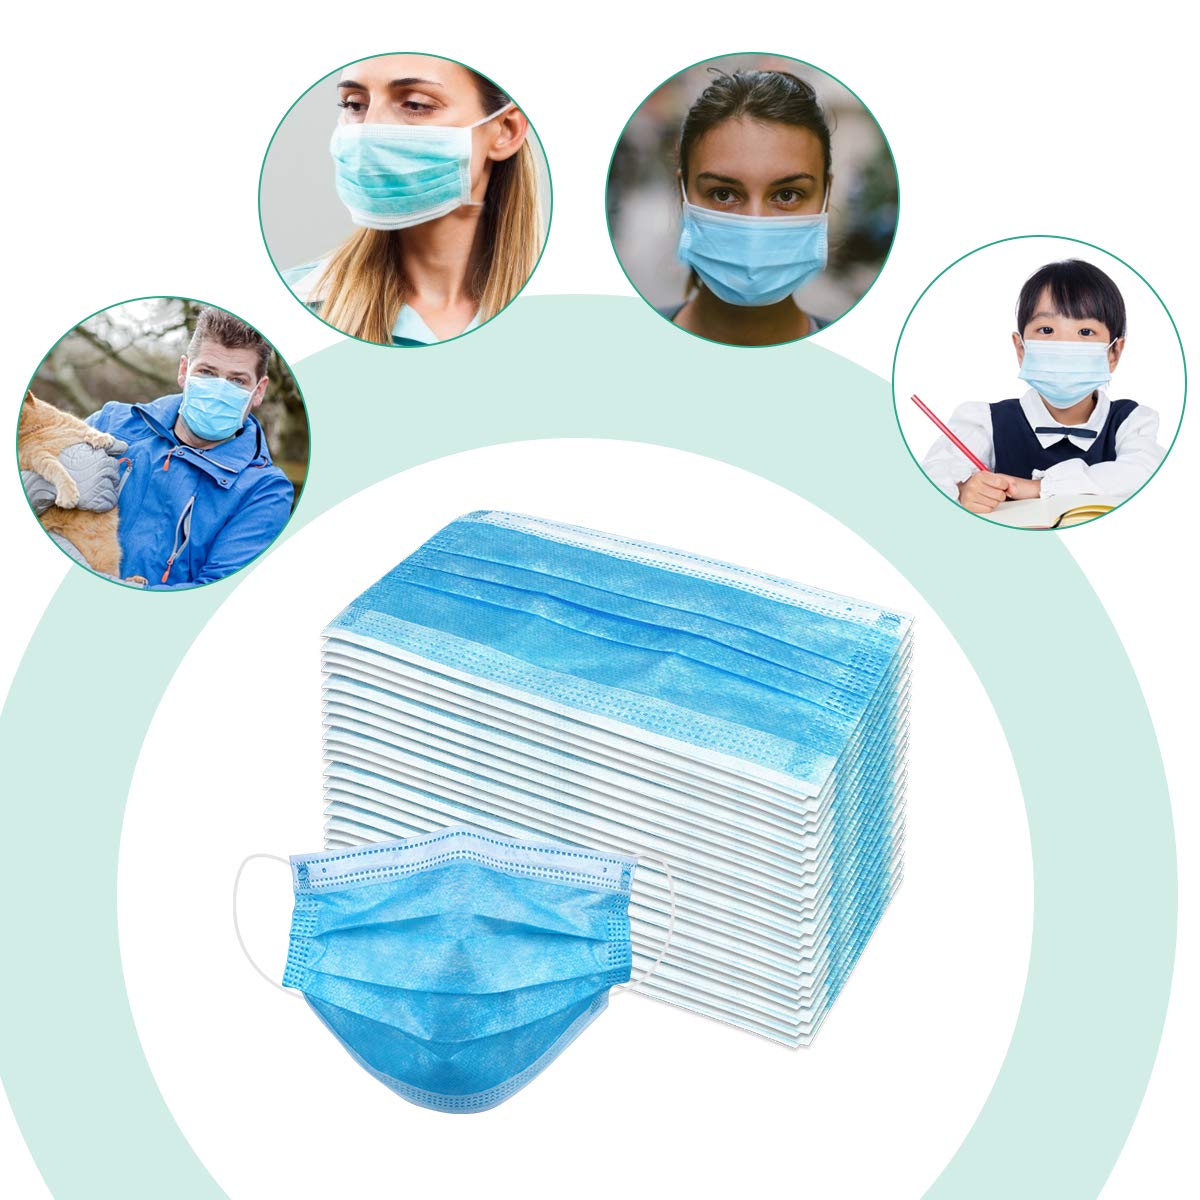 Wecolor 50 Pcs Disposable 3 Ply Earloop Face Masks, Suitable for Home, School, Office and Outdoors (Blue)